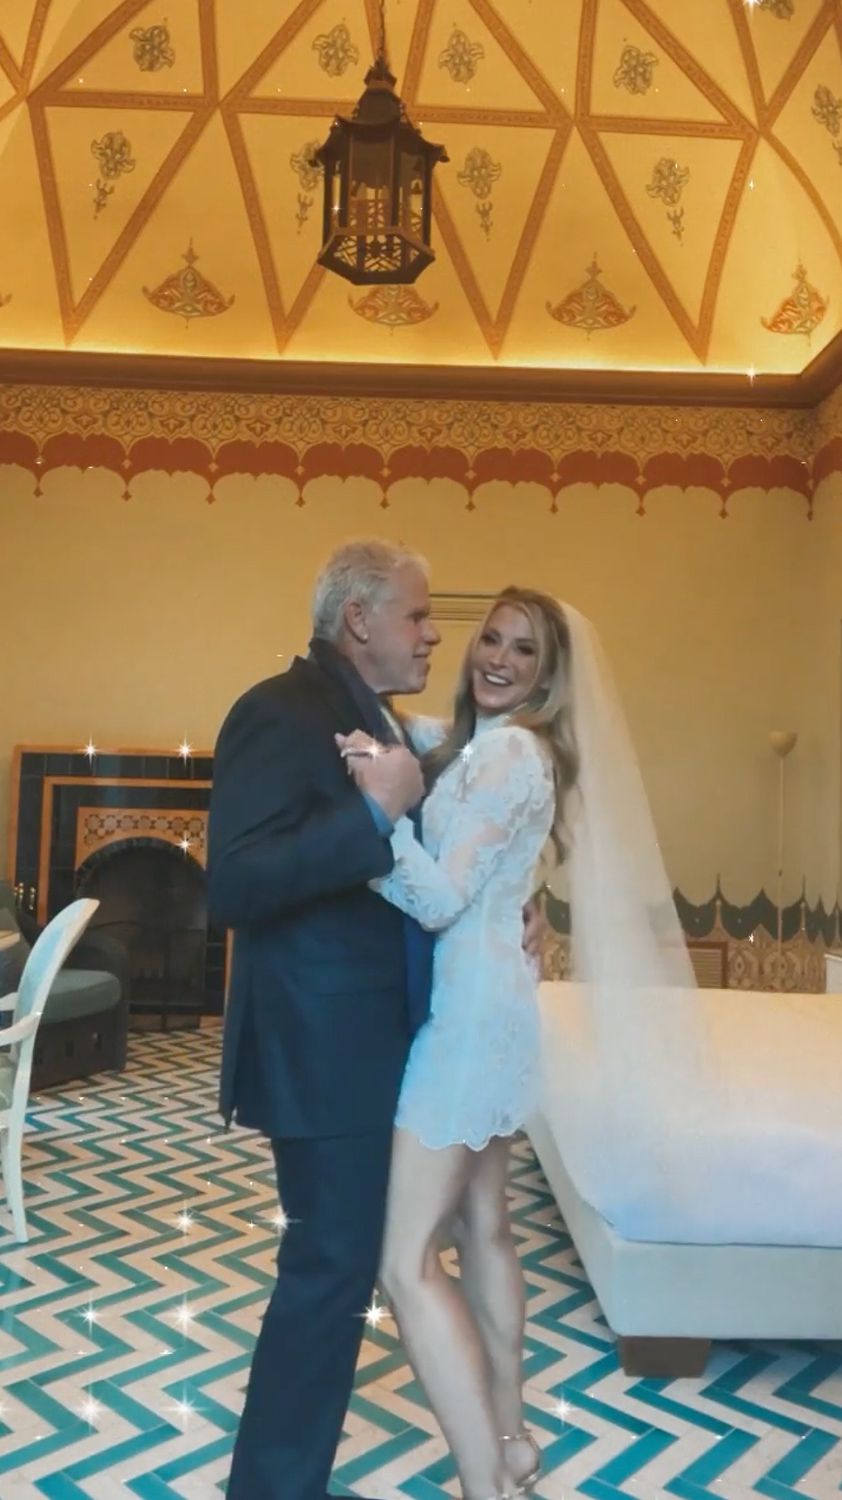 Ron Perlman Marries Fiancée Allison Dunbar in Italy: ‘Spring Has Indeed Sprung’